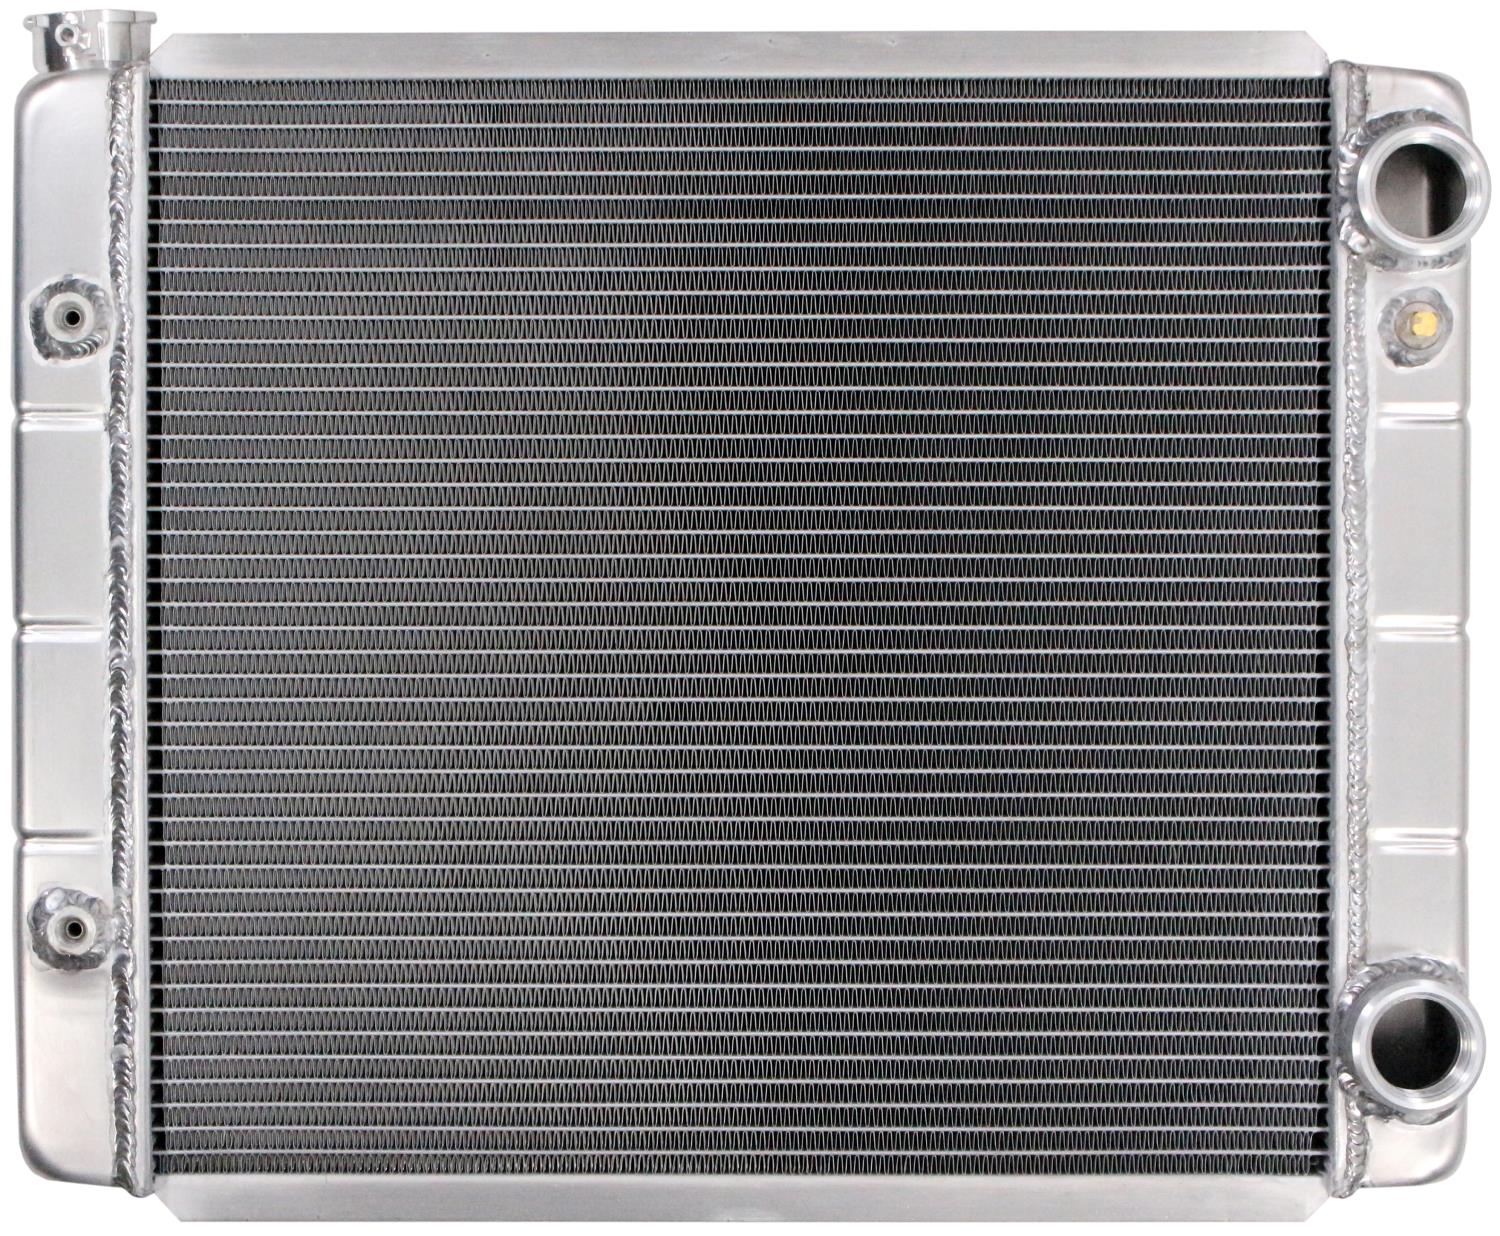 Chevy LS Configuration Double Pass Aluminum Radiator, 2 Row, 1 in. Core w/ ORB Ports & Transmission Cooler [Crossflow]